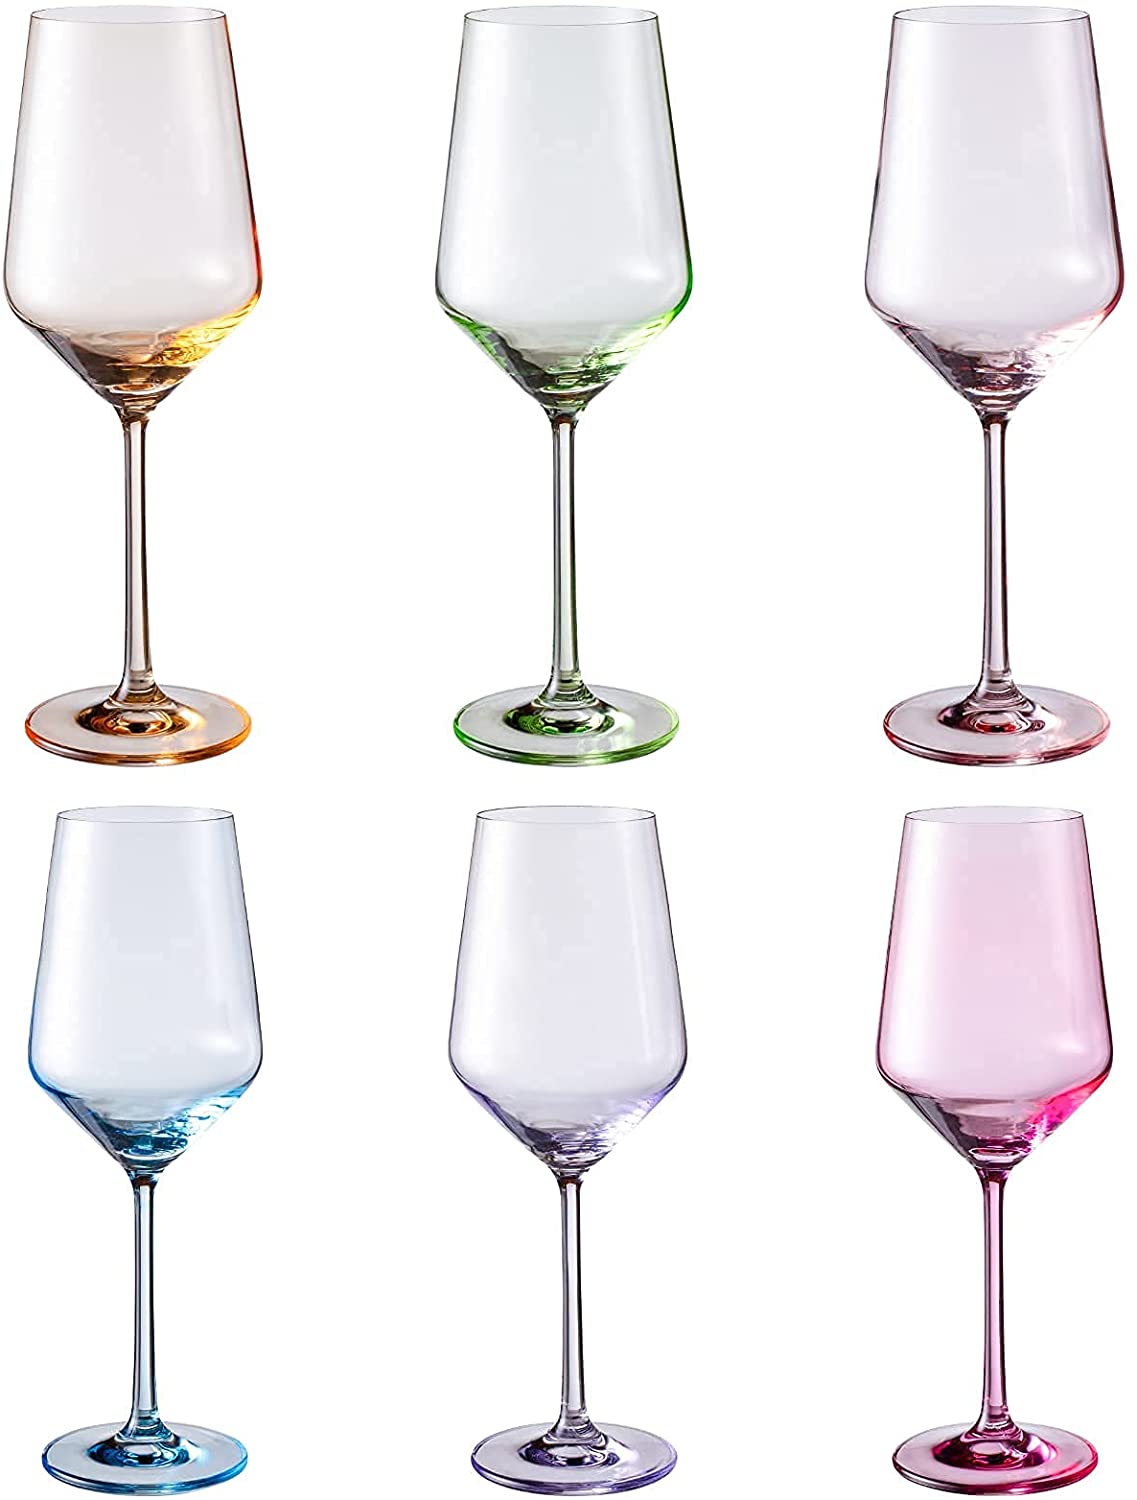 comfit Colored Wine Glass Set of 6-13 oz Made Hand Blown Crystal square  wine glass, Dishwasher-Safe …See more comfit Colored Wine Glass Set of 6-13  oz